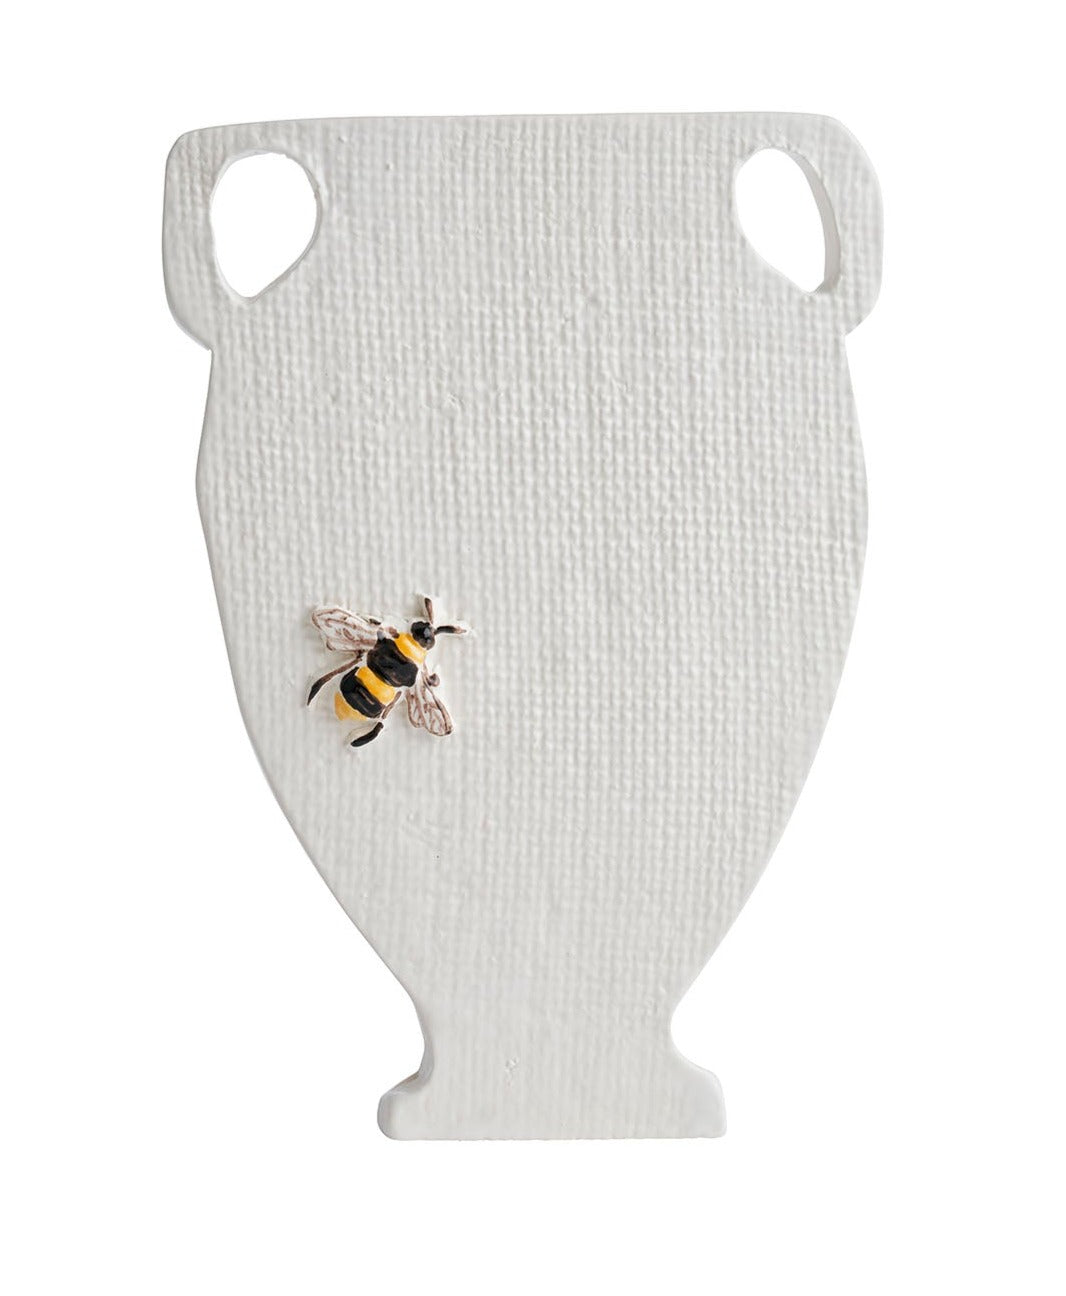 Linen Silhouette Vase with Bee